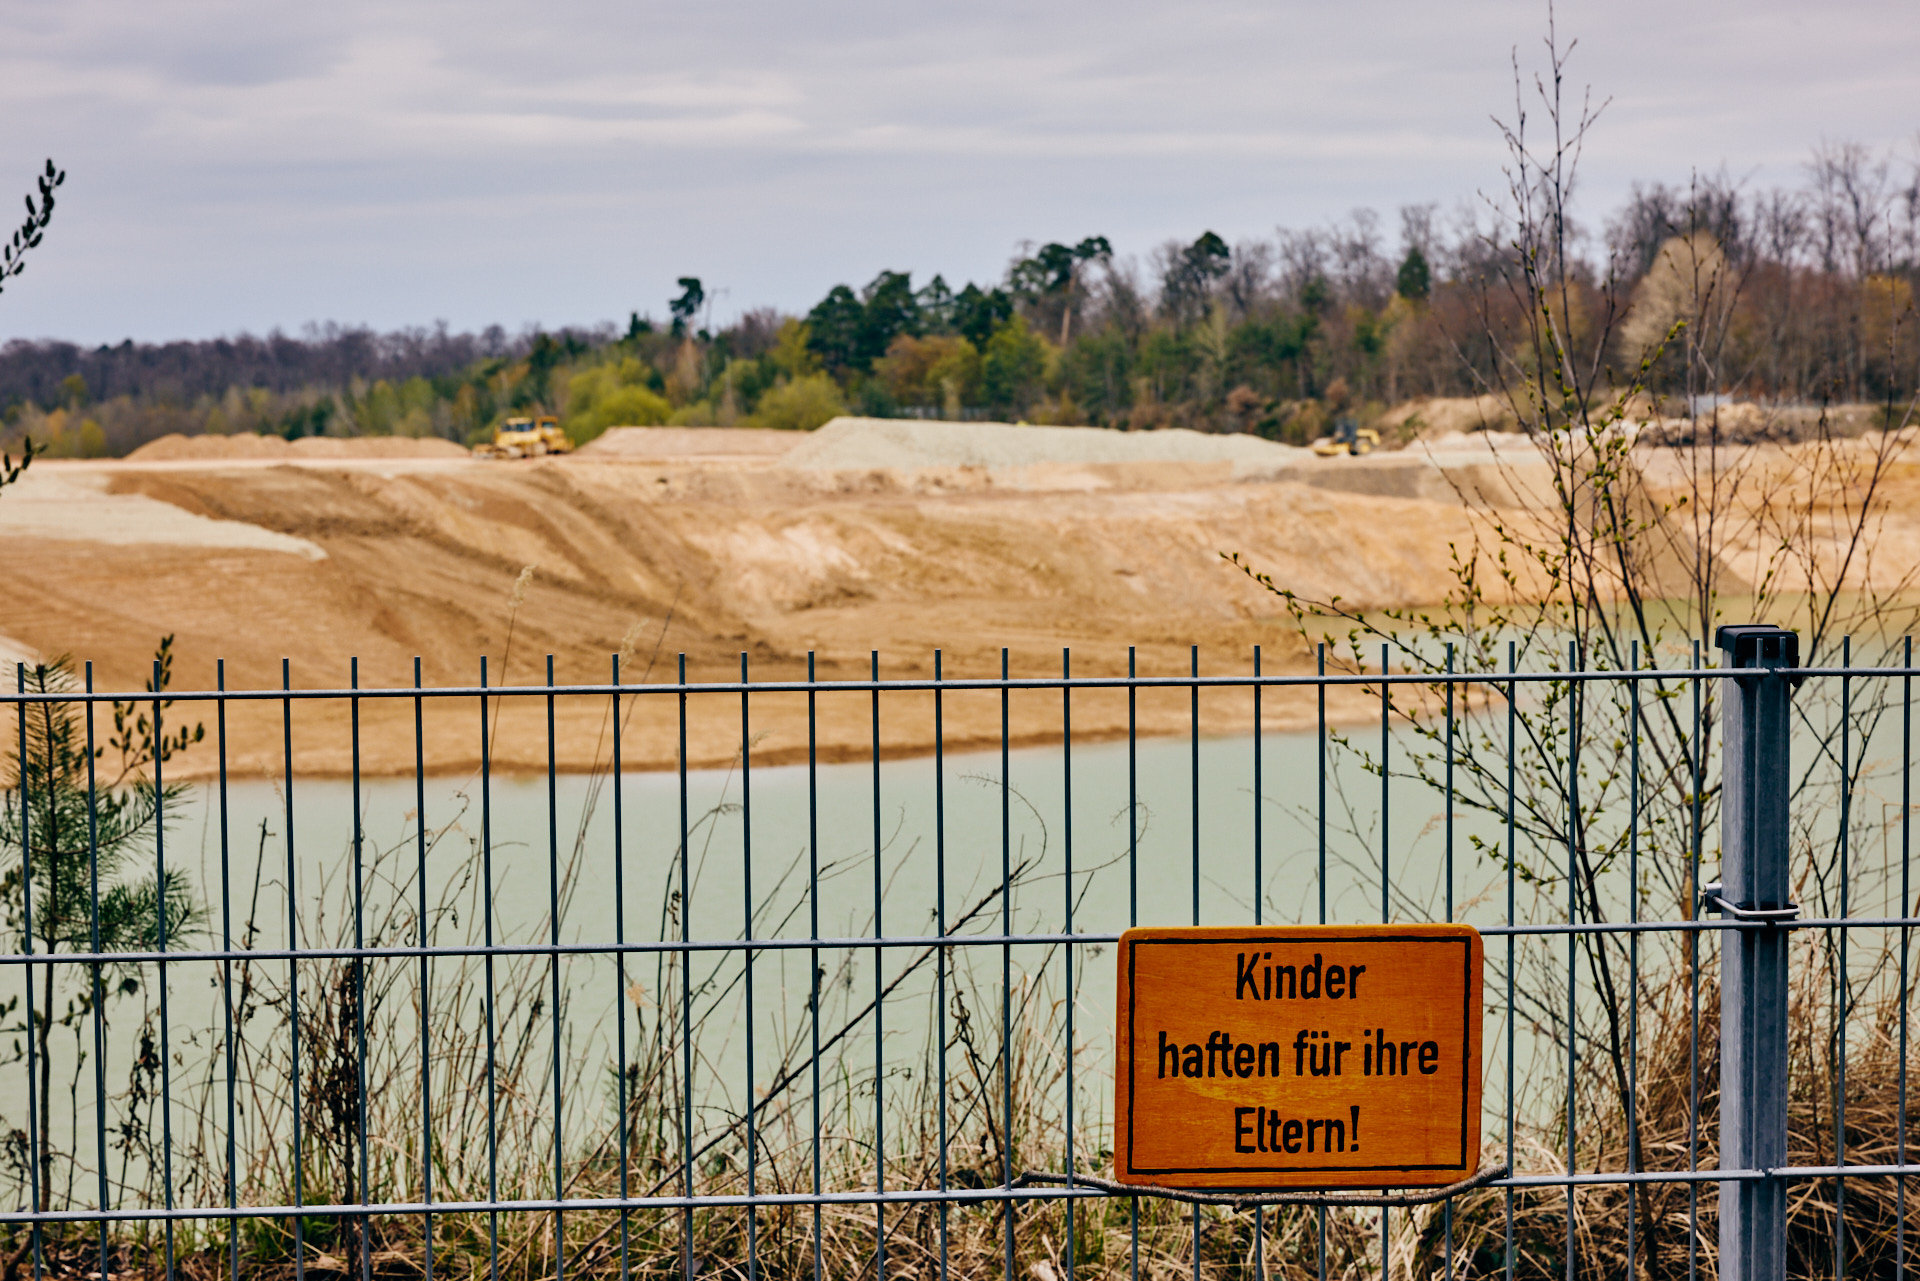 Finite construction raw material extraction: sand and gravel extraction at Langener Waldsee with sign “Children are liable for their parents!” (Photo: Niko Martin)